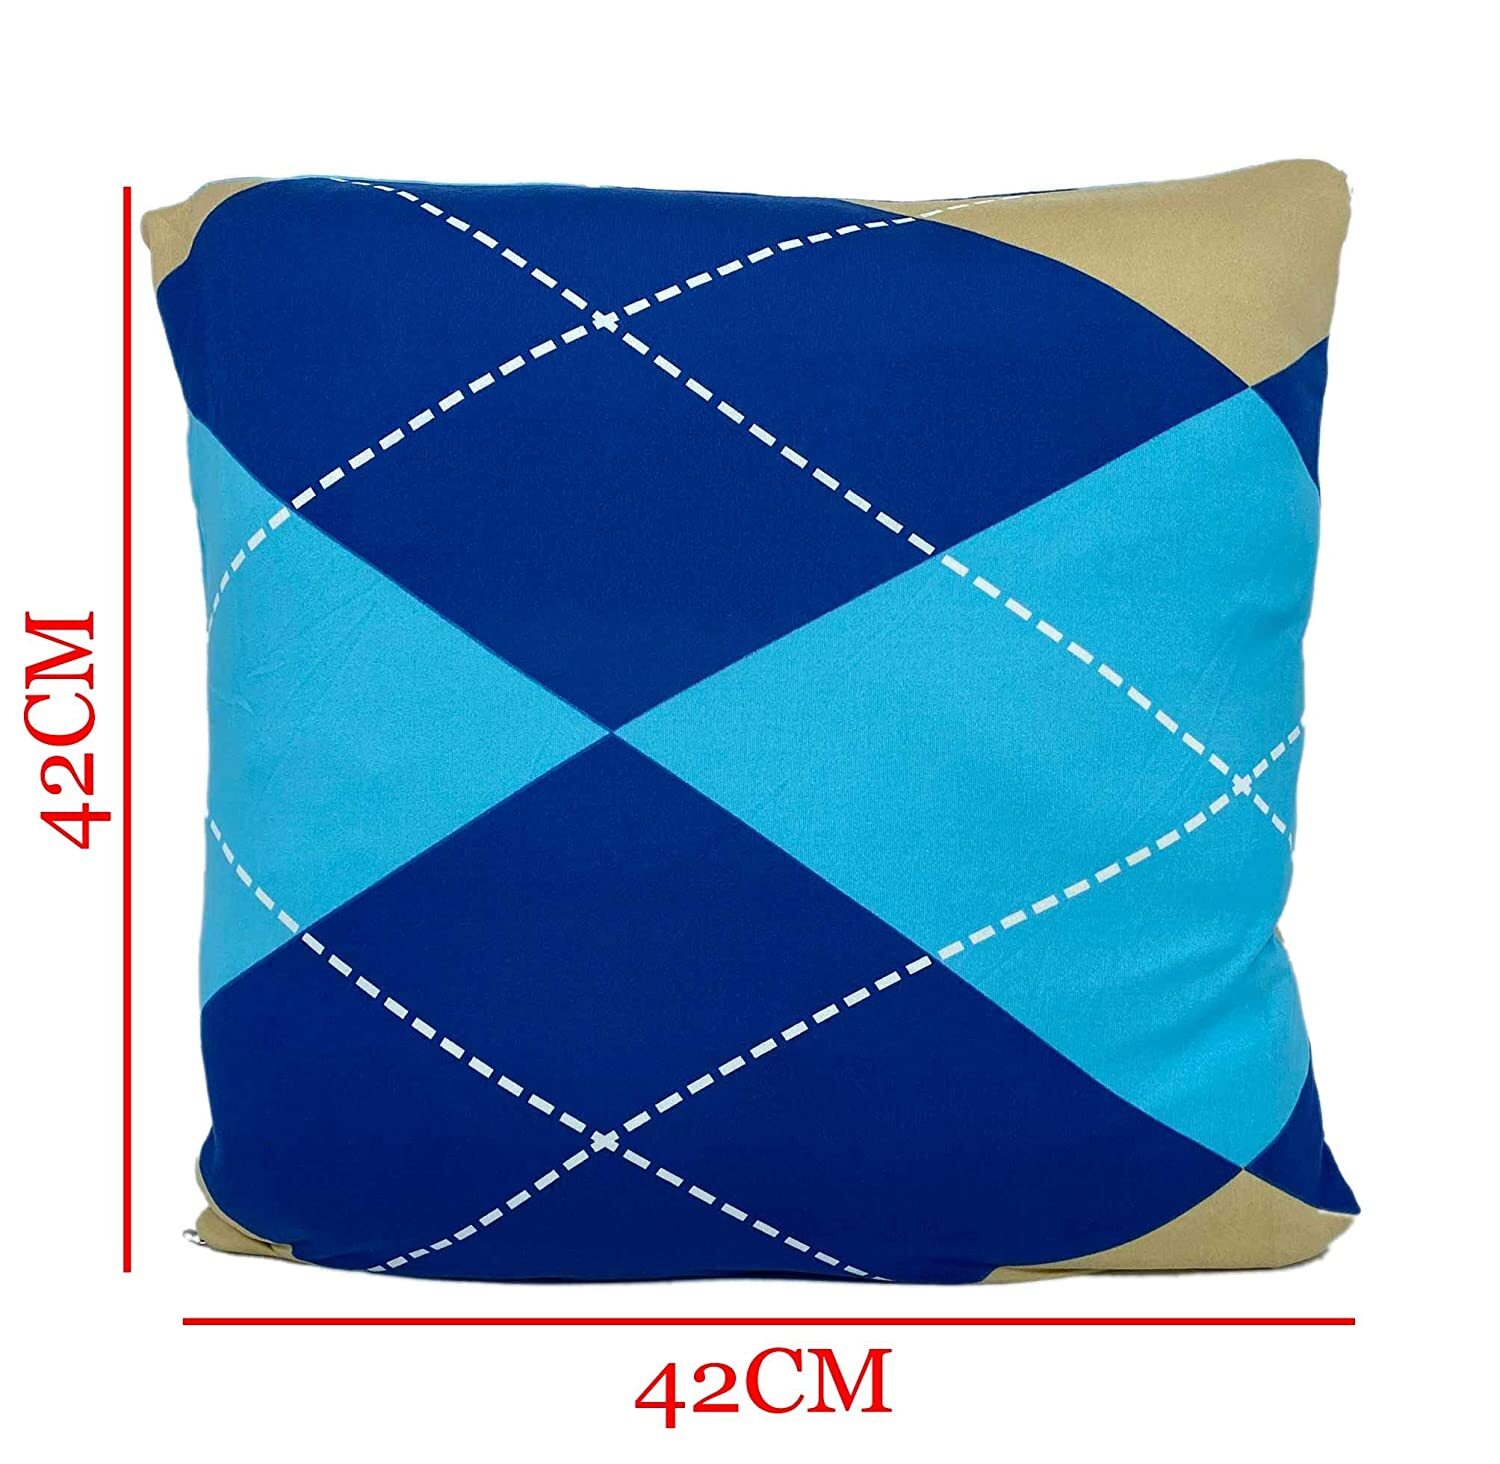 House of Quirk Polyester Throw Pillow Case Cushion Cover Home Sofa Decorative Cover Only No Insert 16.5x16.5 inch/ 42x42cm Check